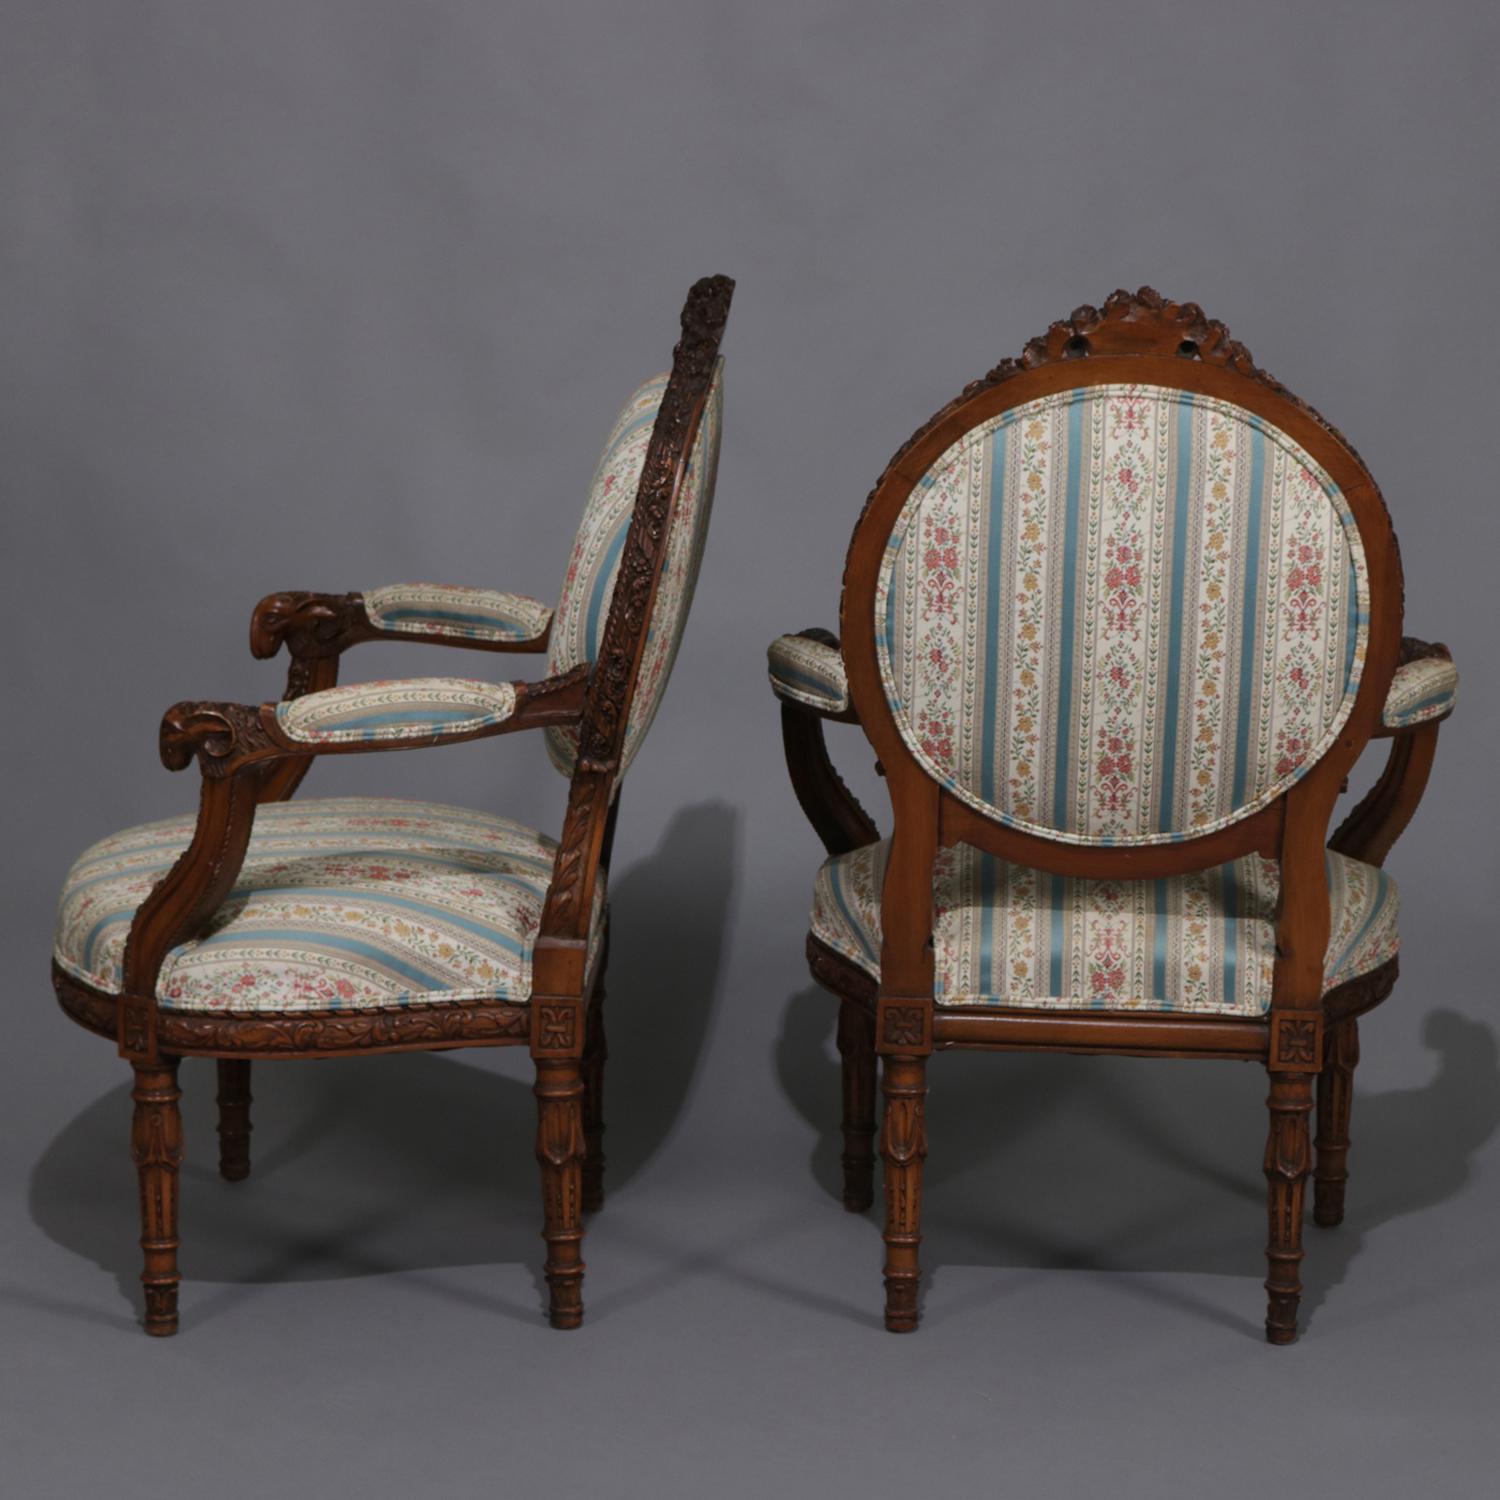 19th Century Antique Italian Figural Carved Walnut Upholstered Parlor Set, Doves and Rams